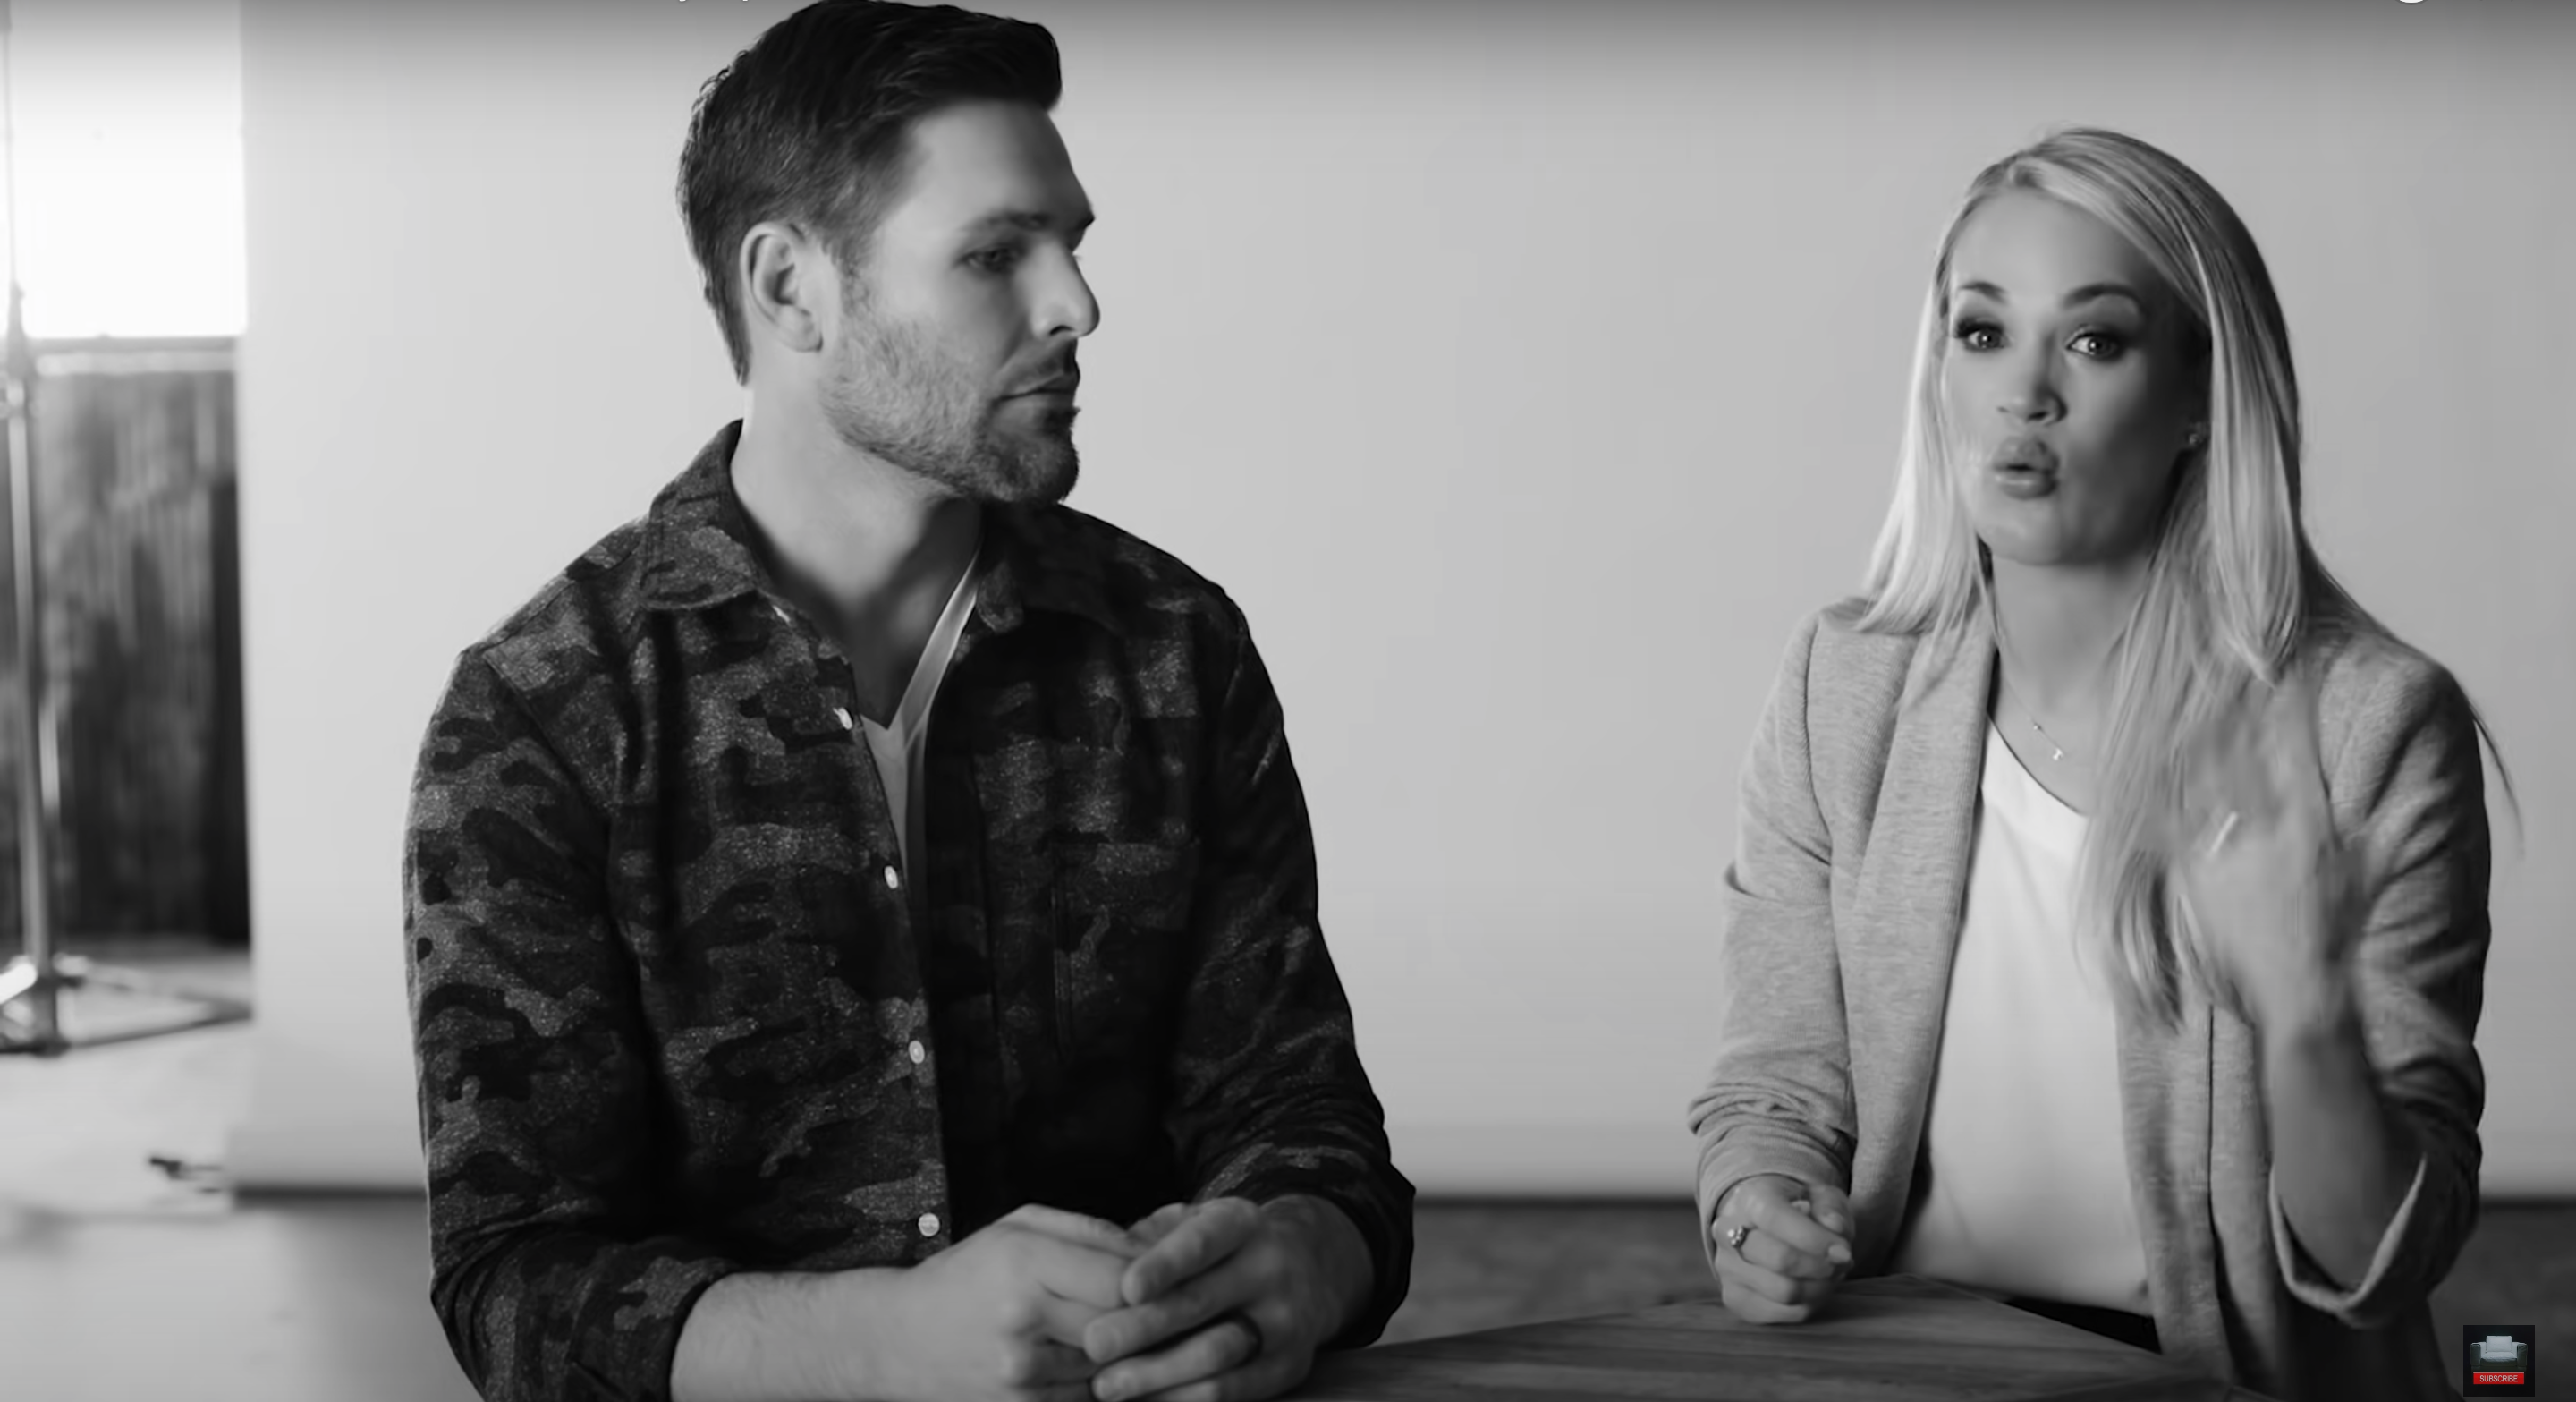 Carrie Underwood and Mike Fisher on "God & Country" Episode 3. | Source: Youtube.com/I Am Second